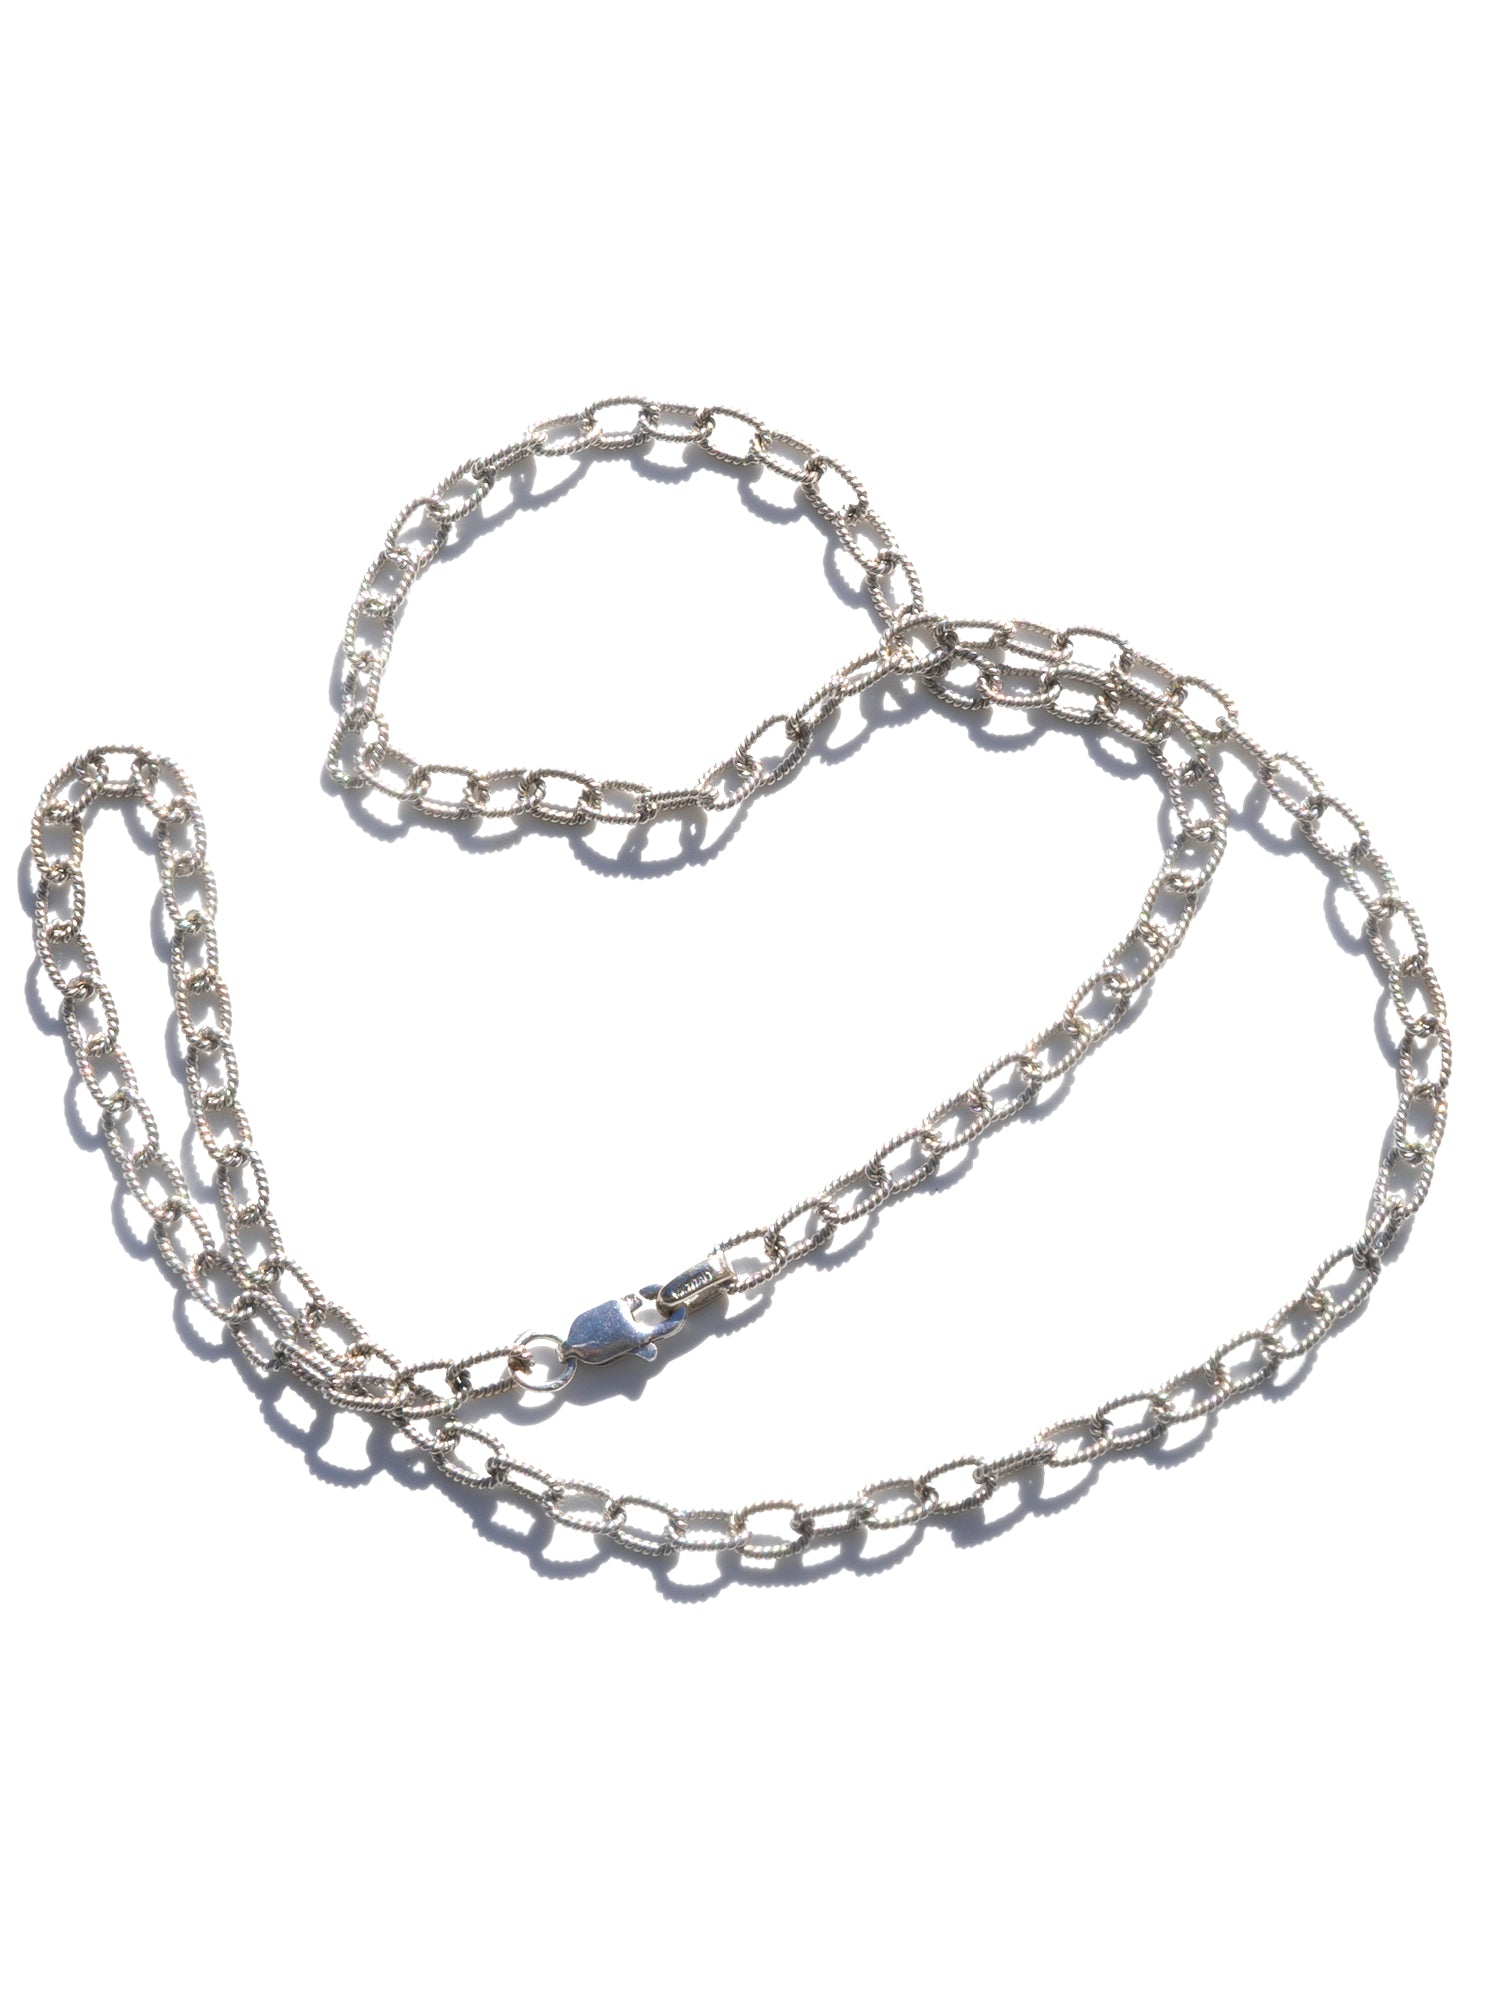 Vintage White Gold Twisted Wire Cable Chain